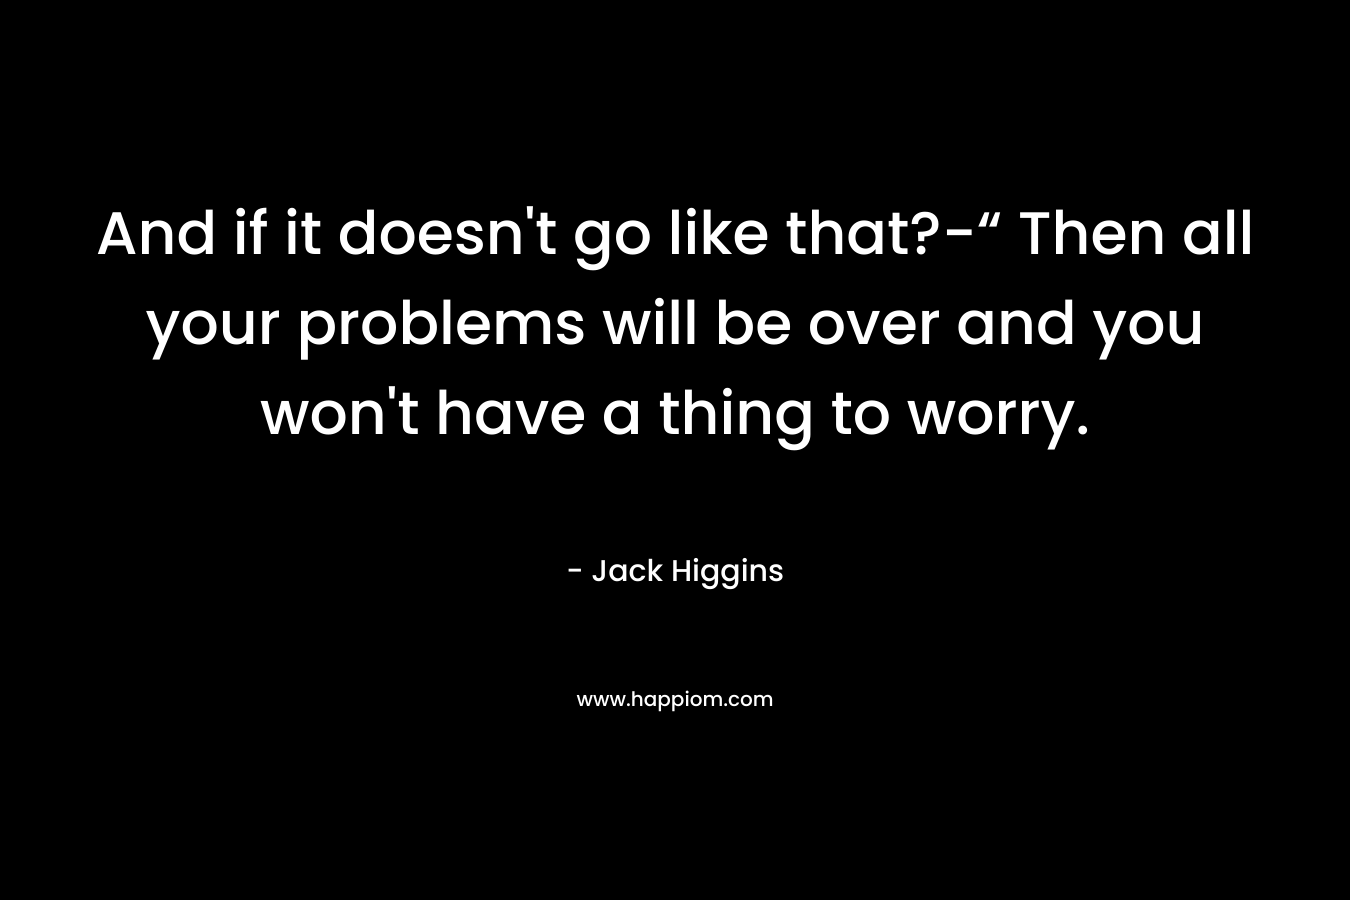 And if it doesn't go like that?-“ Then all your problems will be over and you won't have a thing to worry.